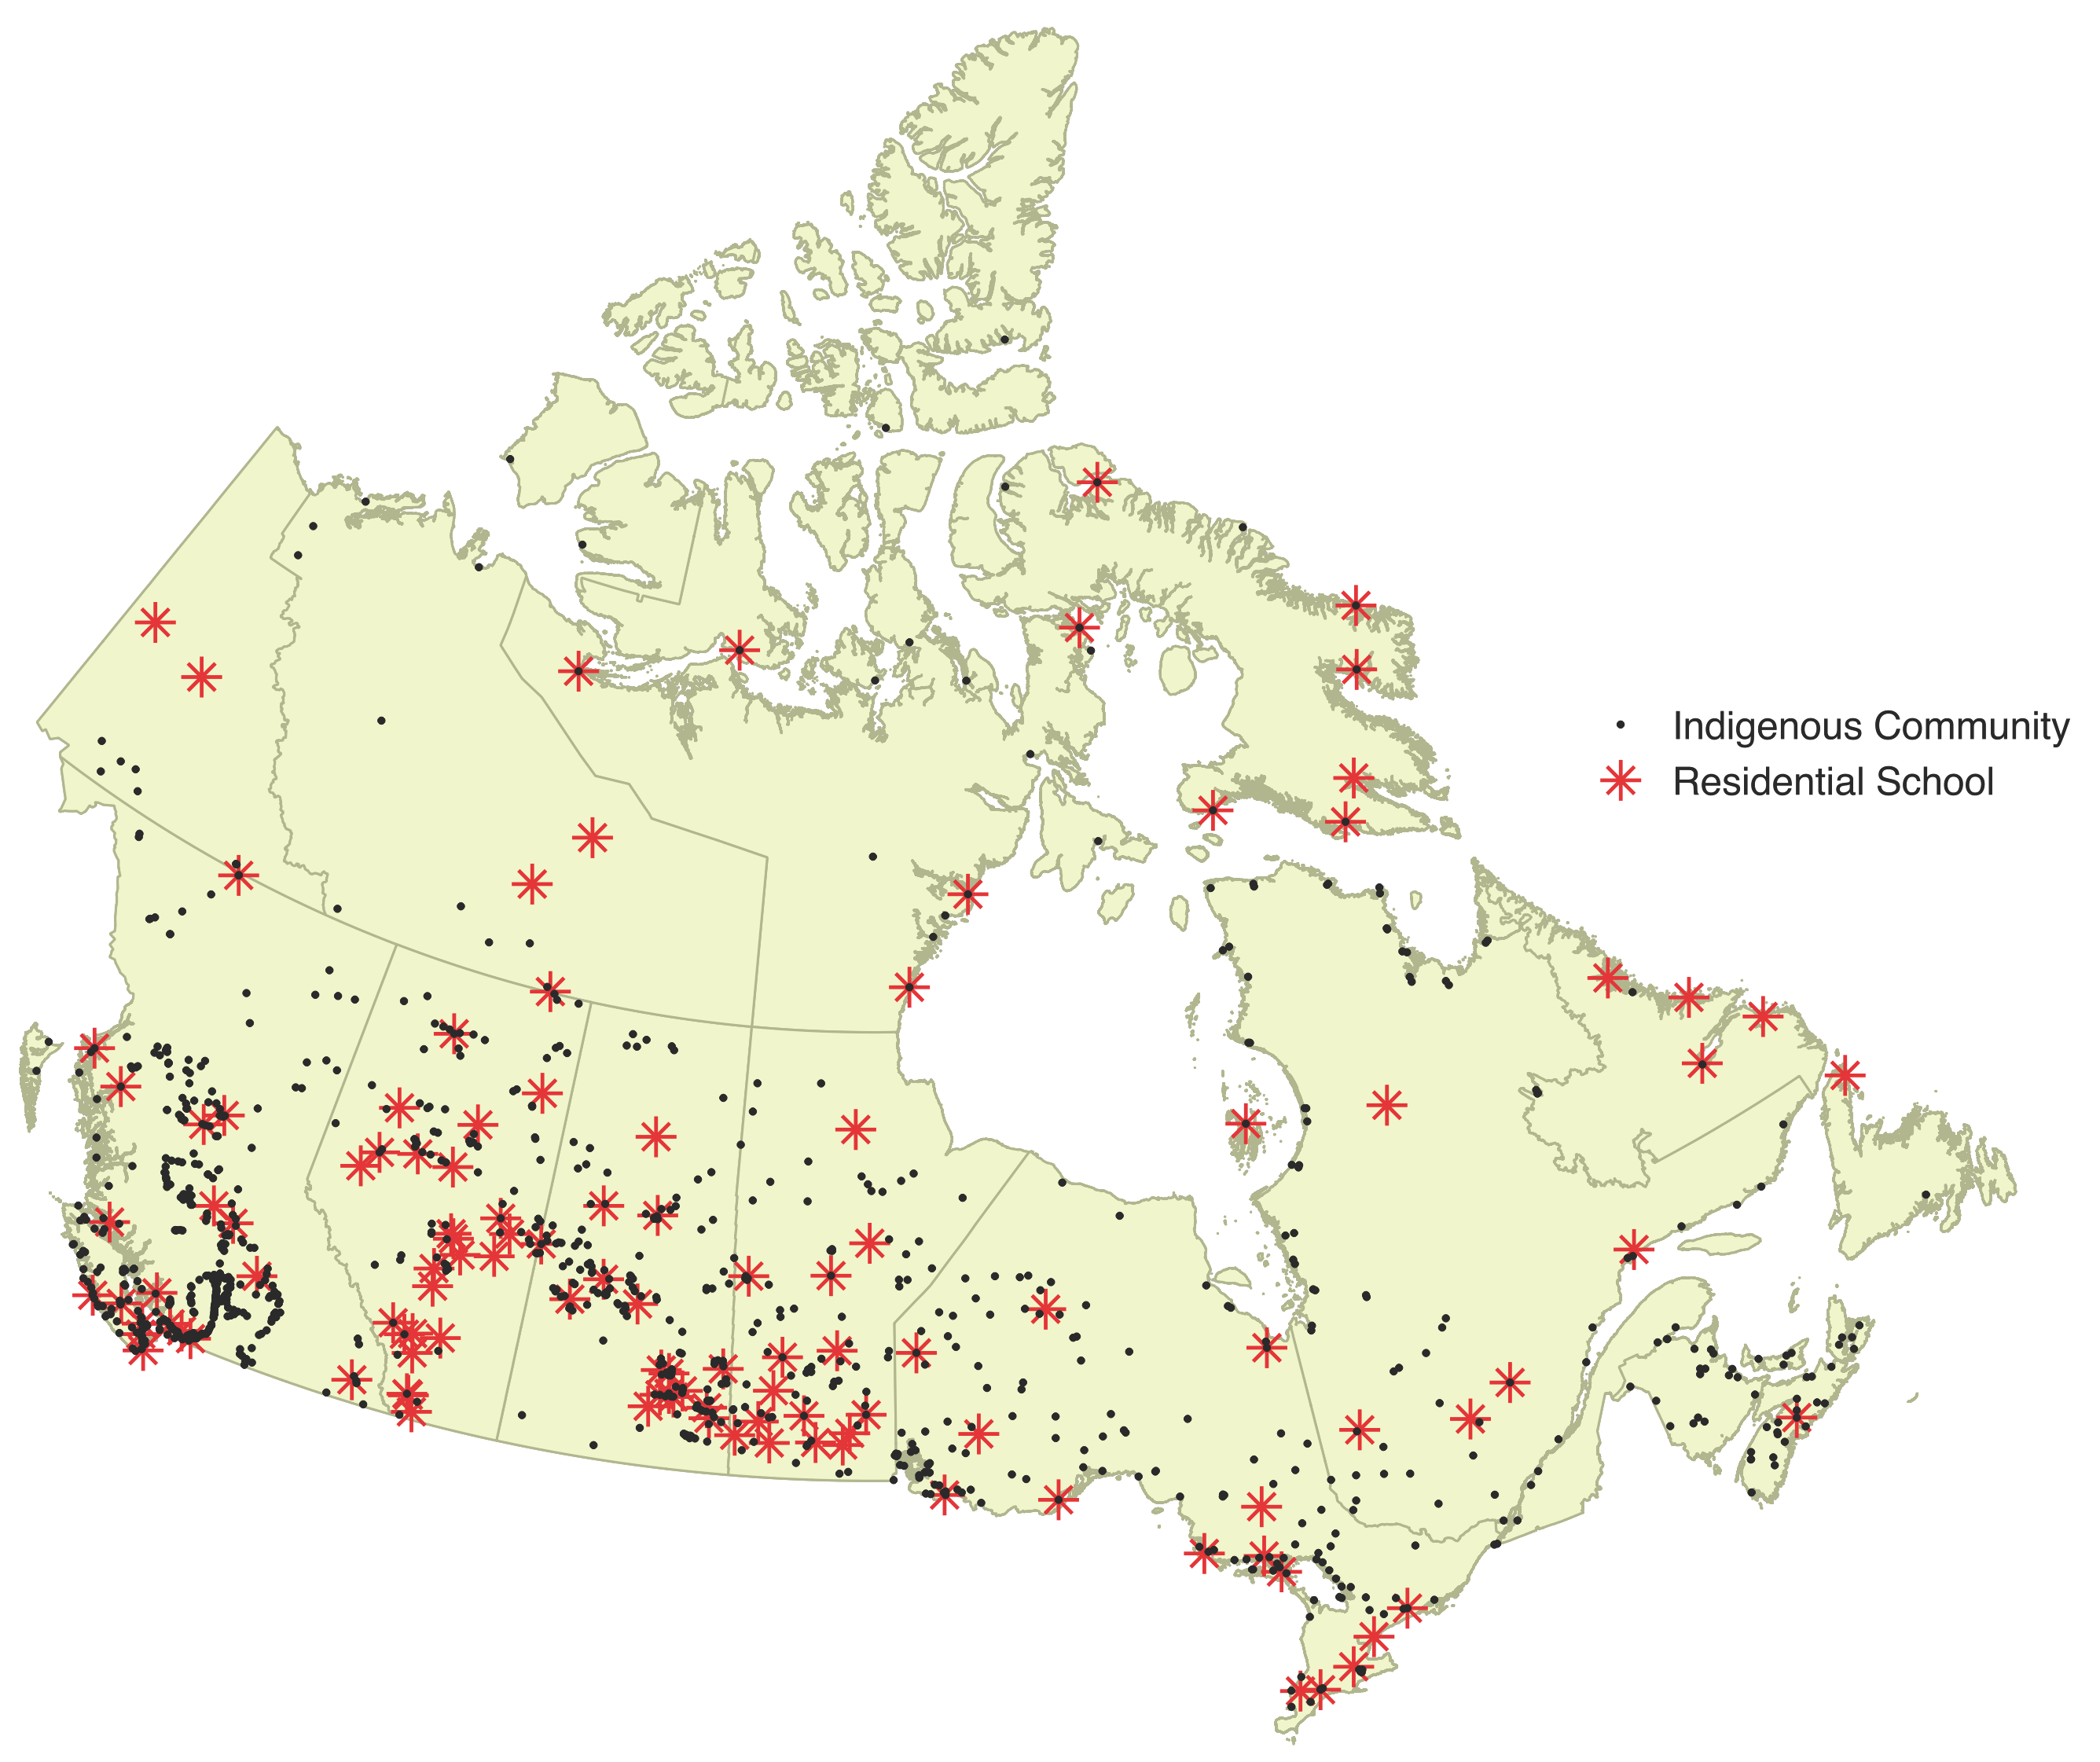 "Map of locations of residential schools in Canada"